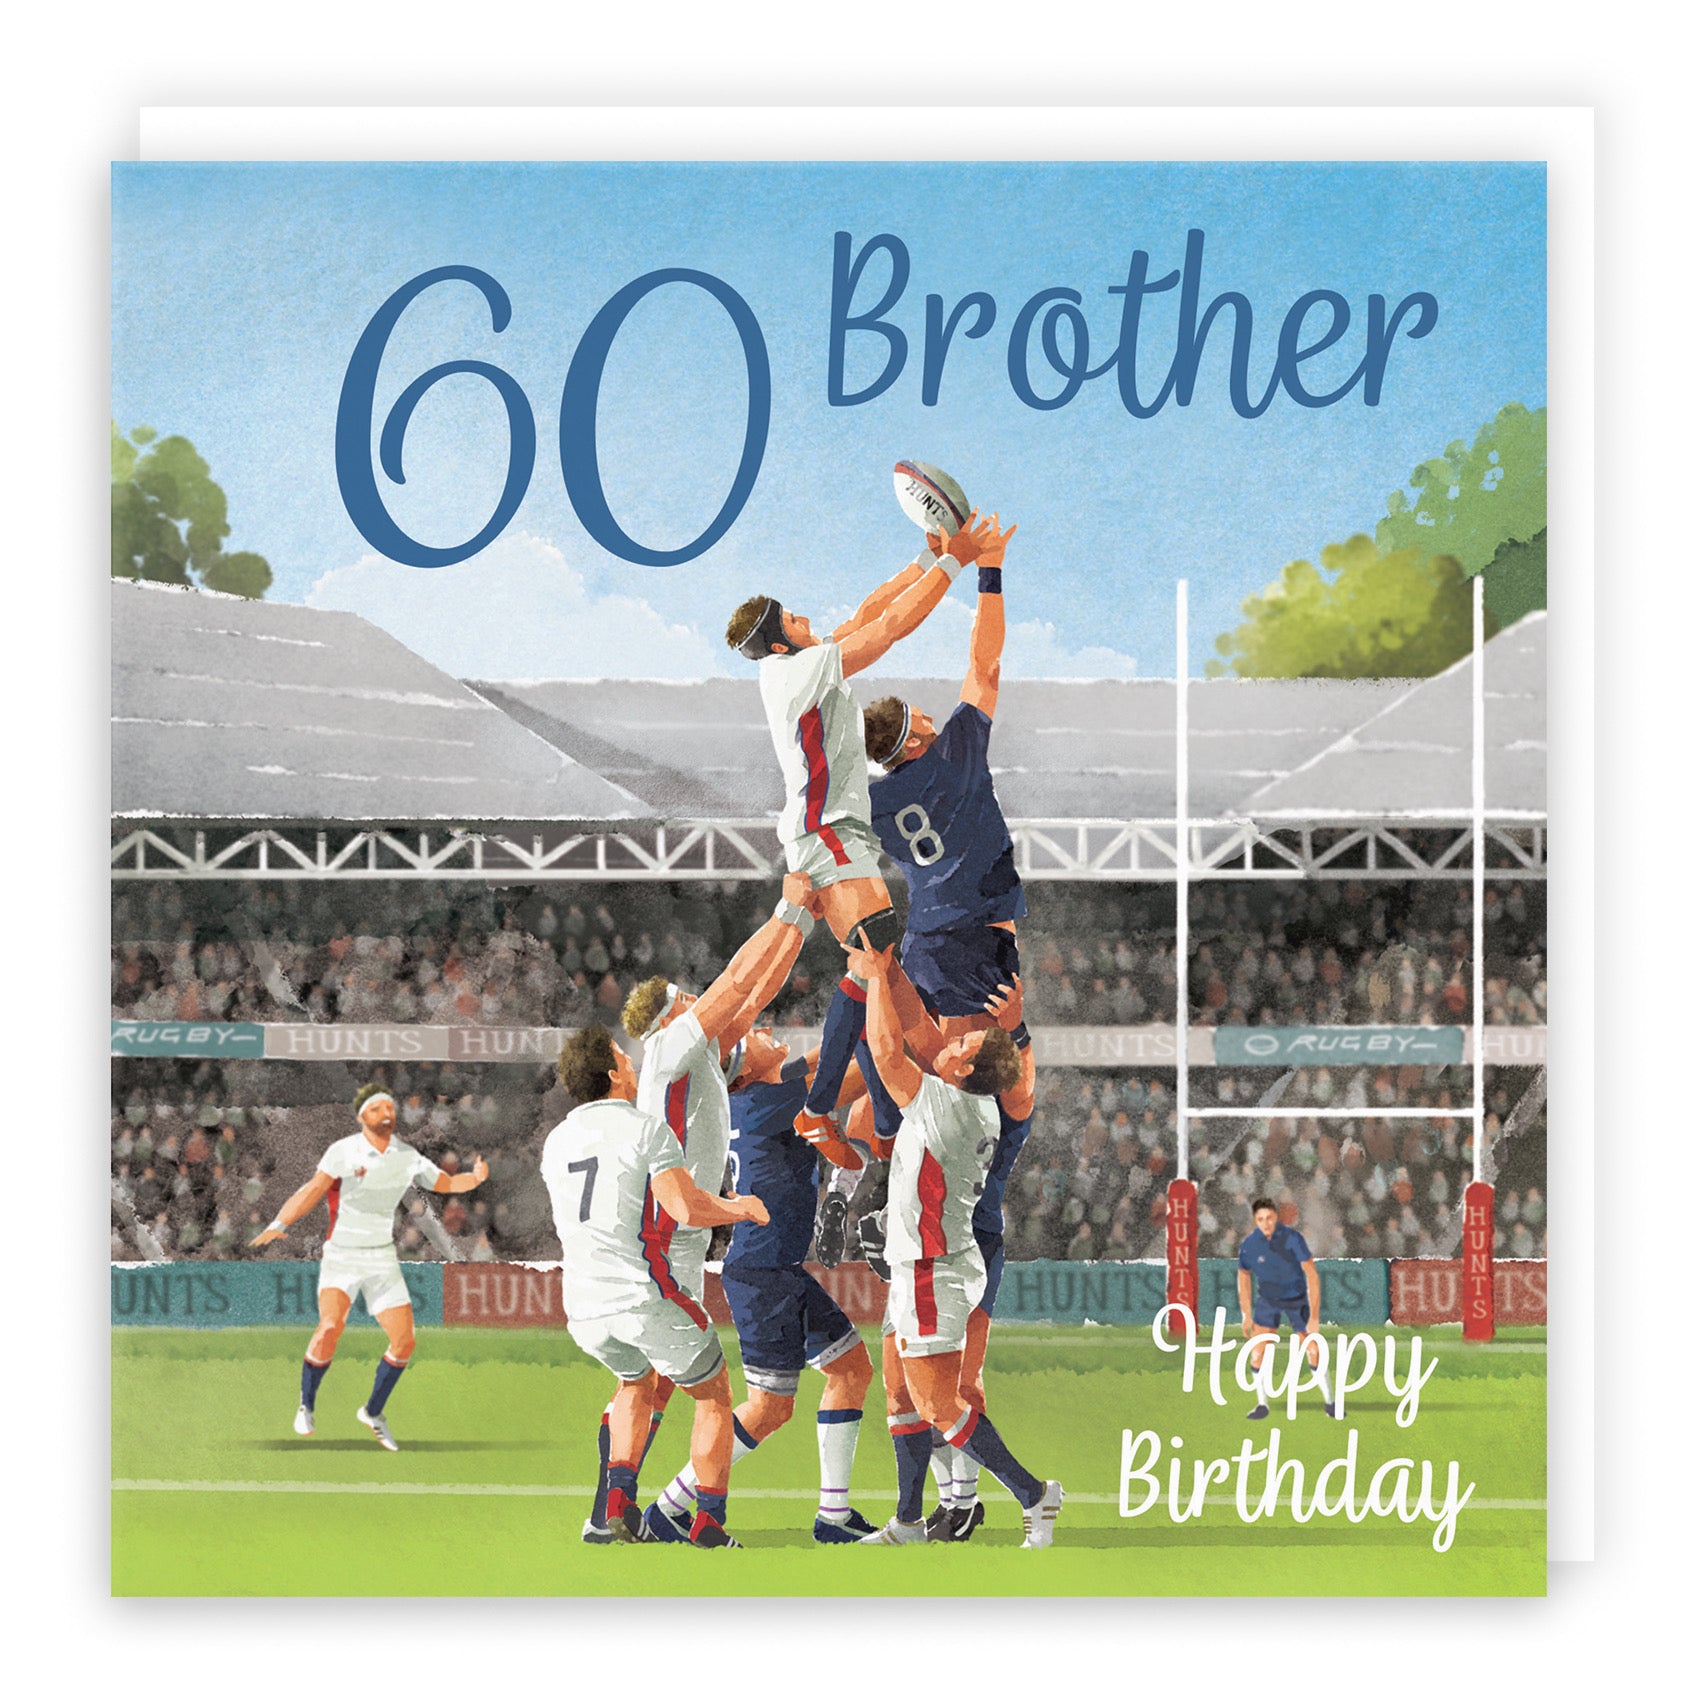 60th Brother Rugby Birthday Card Milo's Gallery - Default Title (B0CPQZ8VRD)